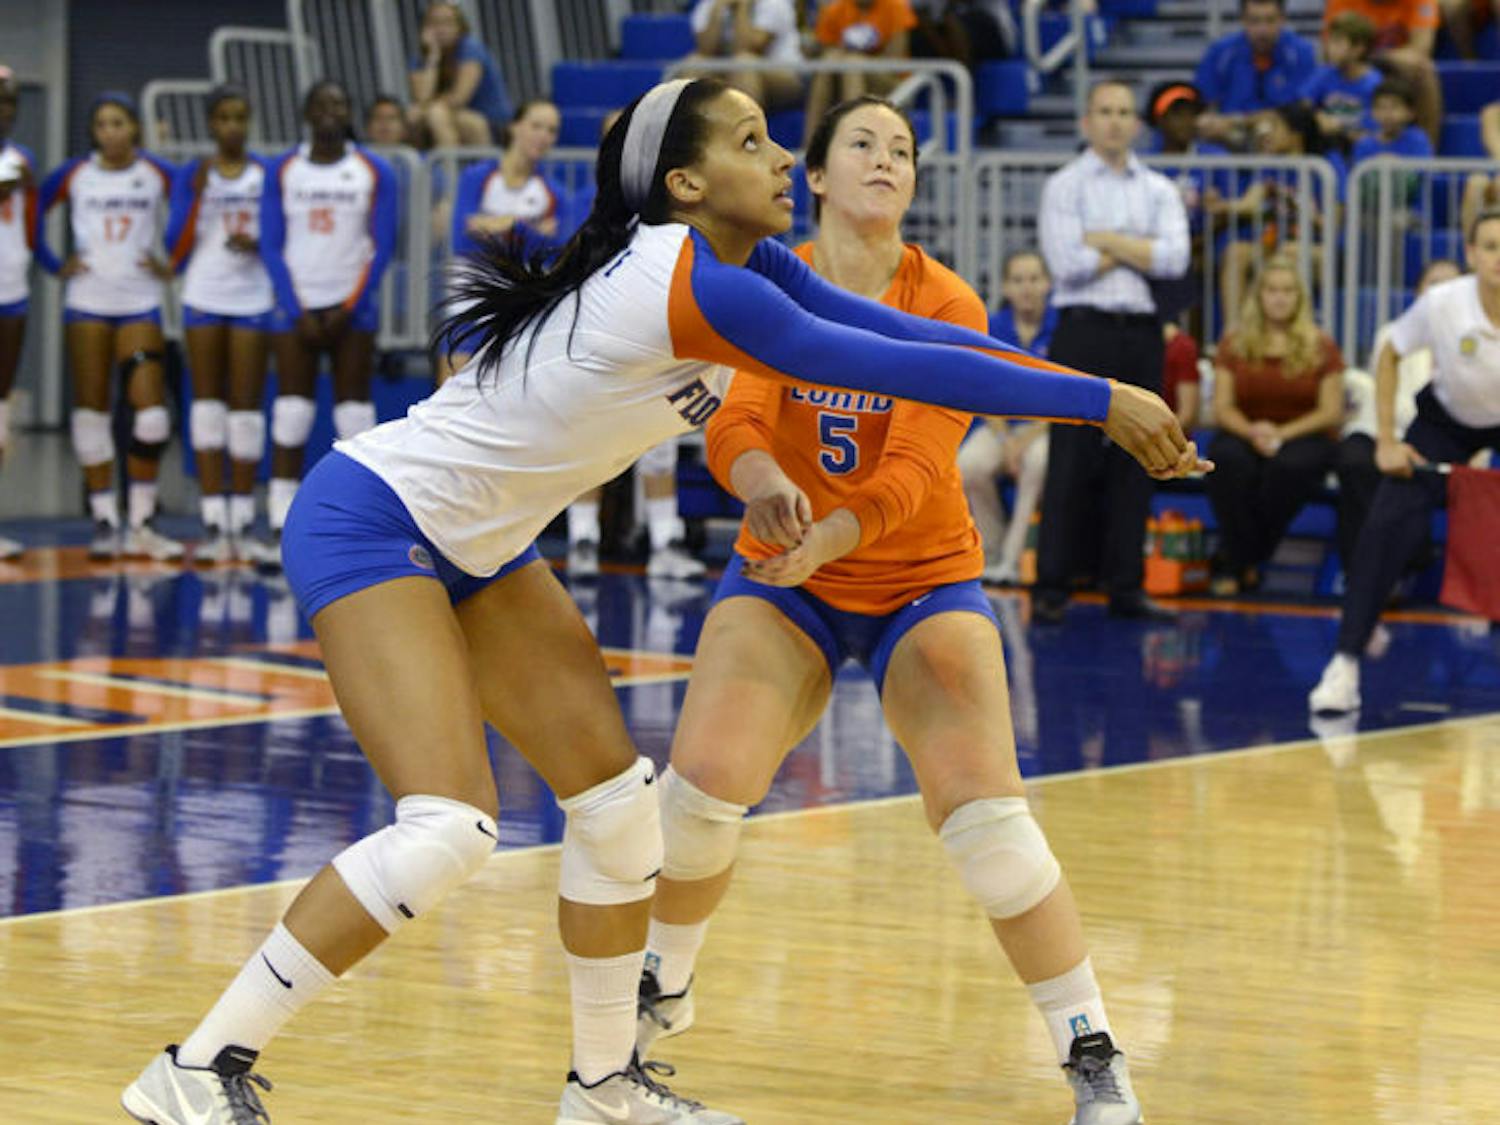 Gabby Mallette squats to bump the ball during Florida’s 3-0 win against Duke on Aug. 31 in the O’Connell Center. No. 5 Florida beat then-No. 2 Stanford on Saturday before losing to then-No. 1 Penn State on Sunday.